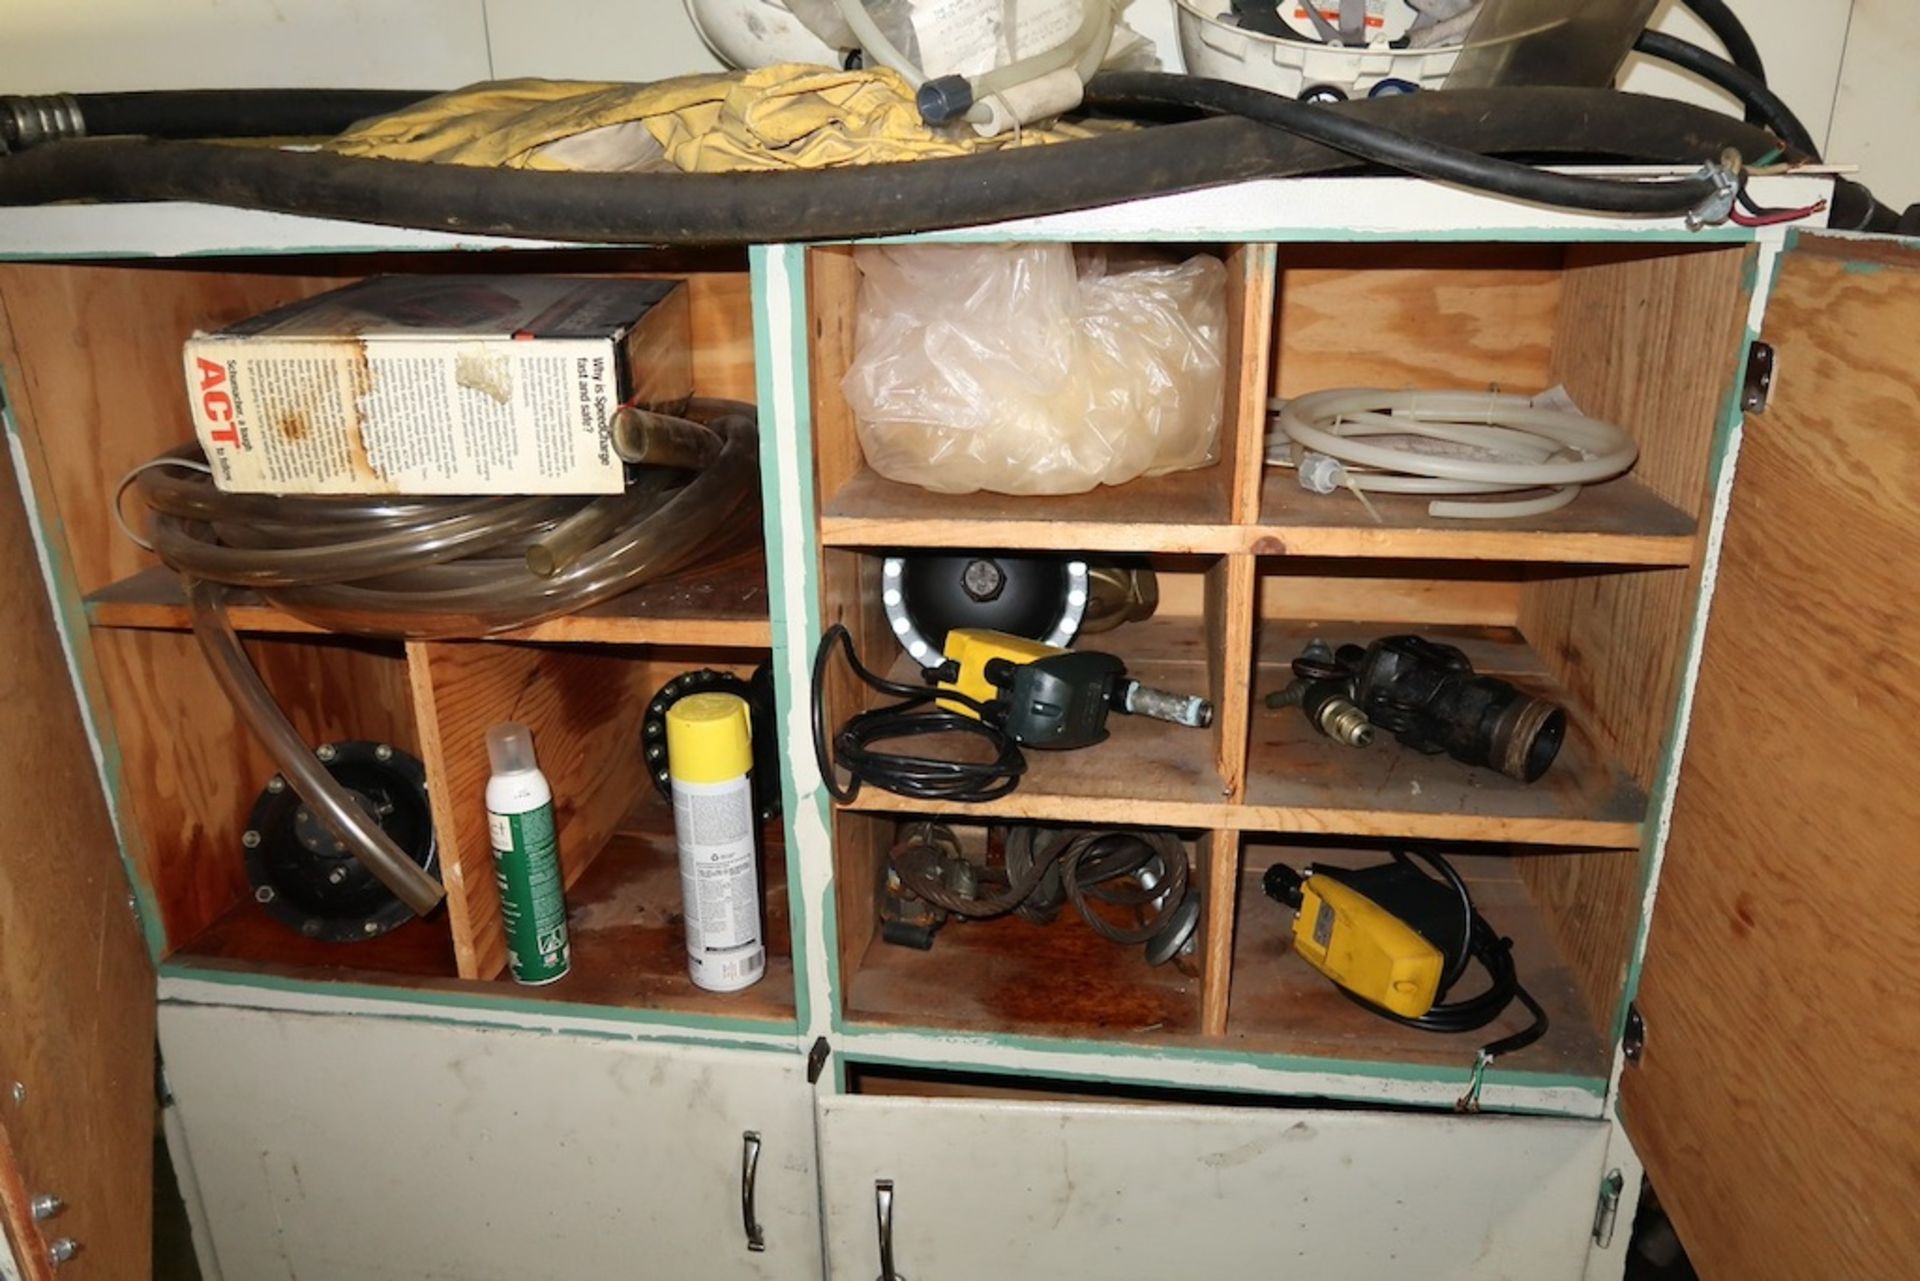 Remaining Contents of Compressor Room, to Include Desks, Cabinets, Etc. - Image 21 of 21